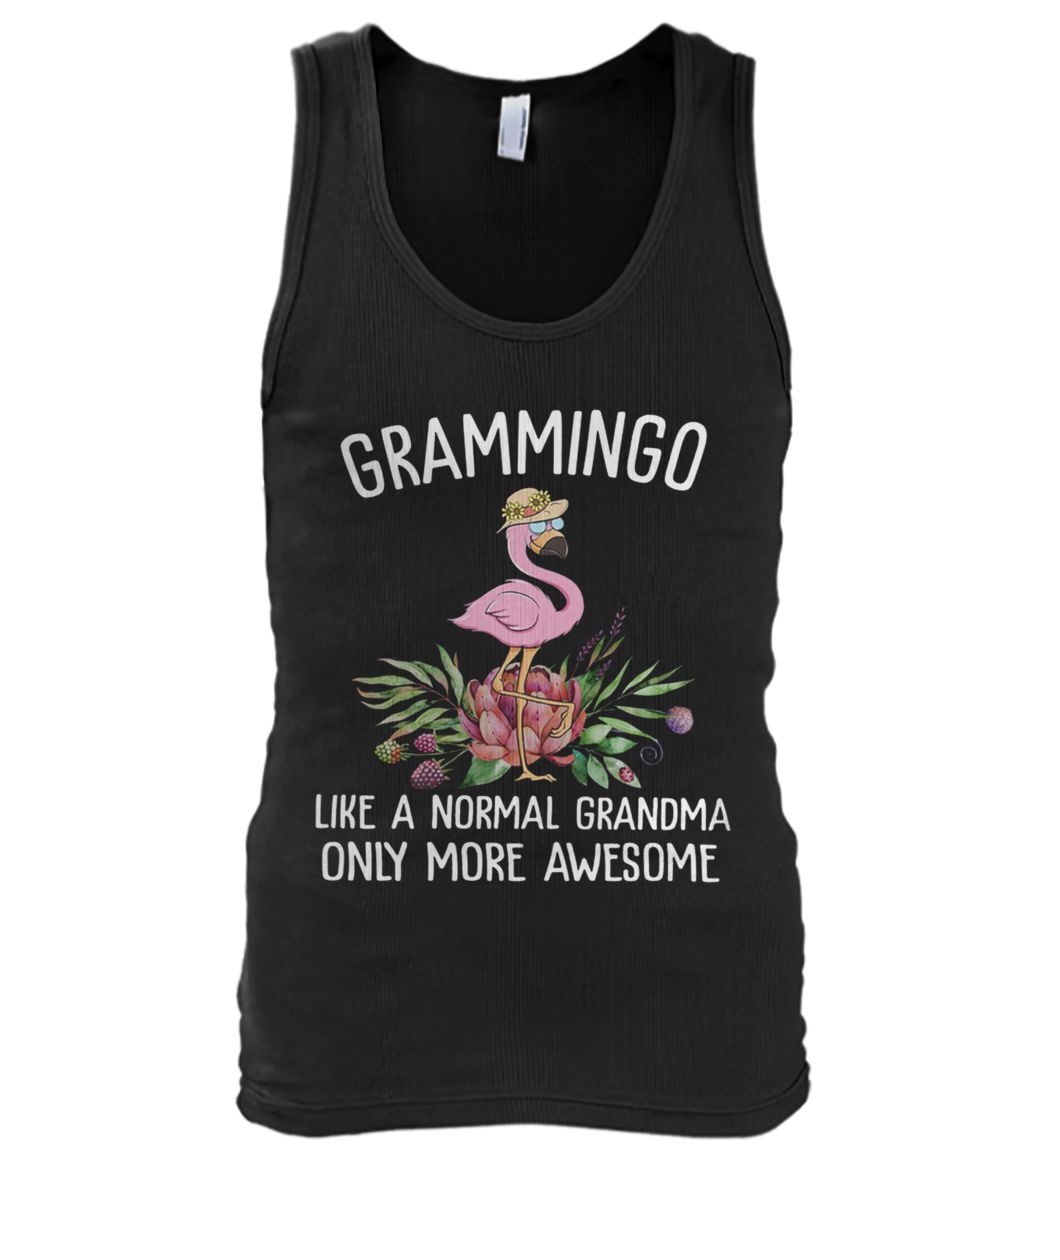 Grammingo like a normal grandma only more awesome men's tank top